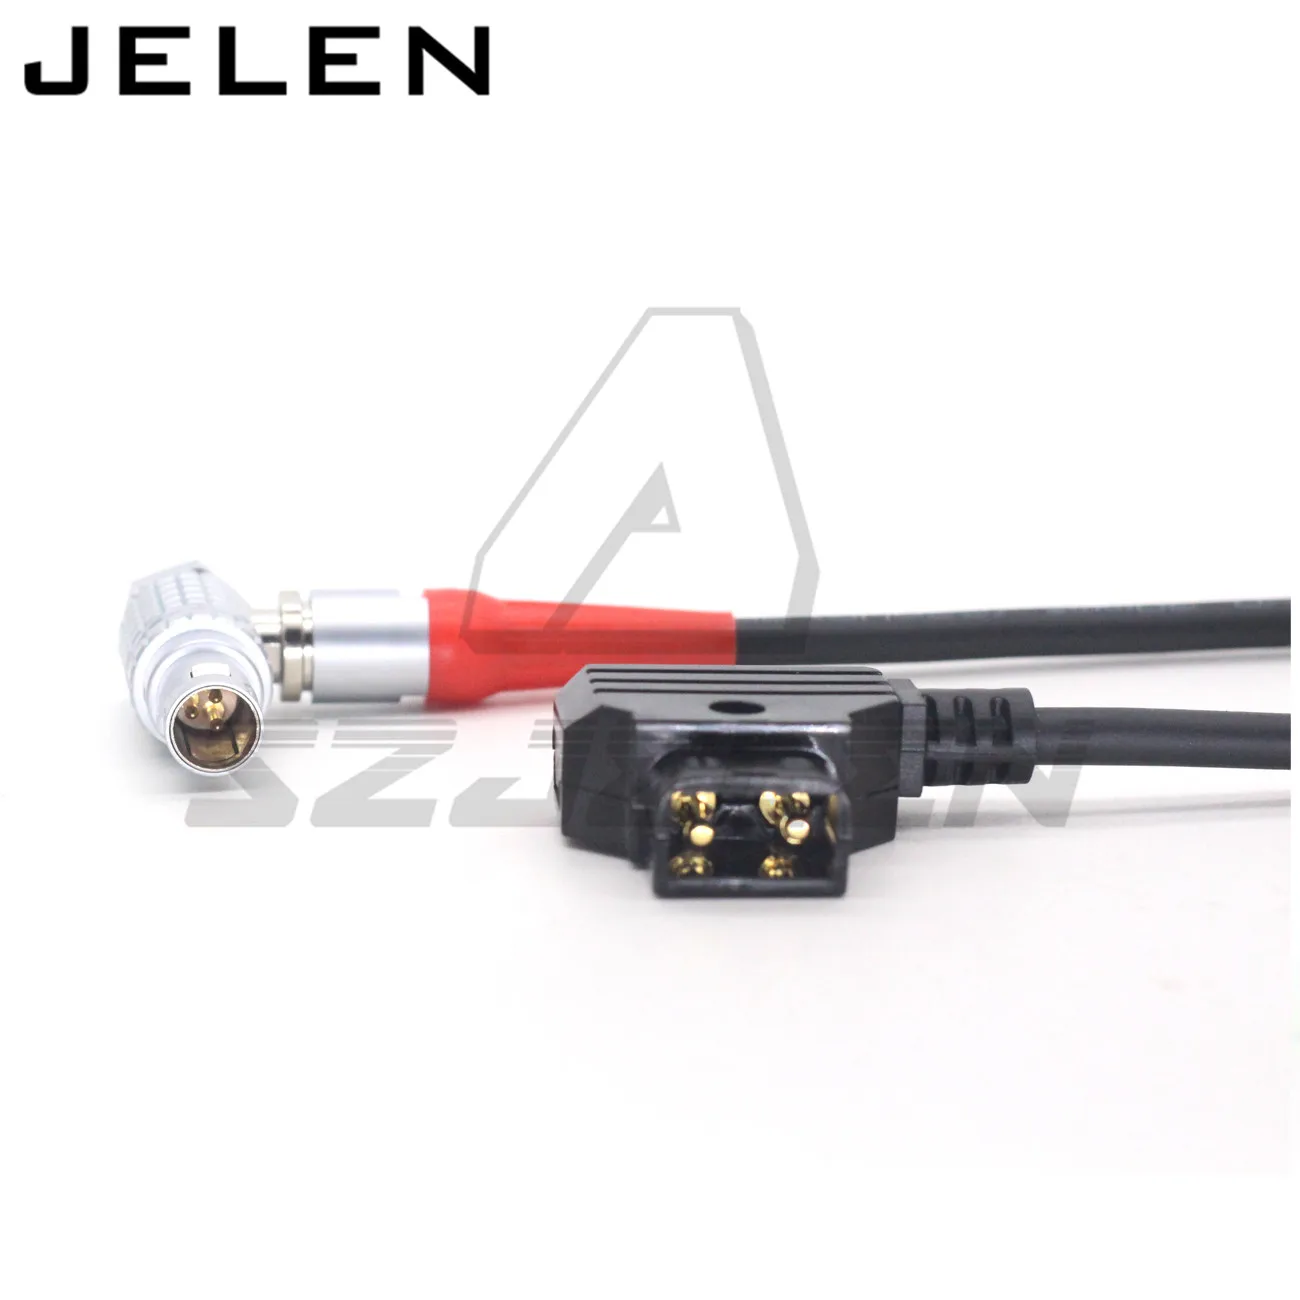 DTAP to 1B 3 pin for WAVE 1 BETZ TOOLS power cable - AliExpress